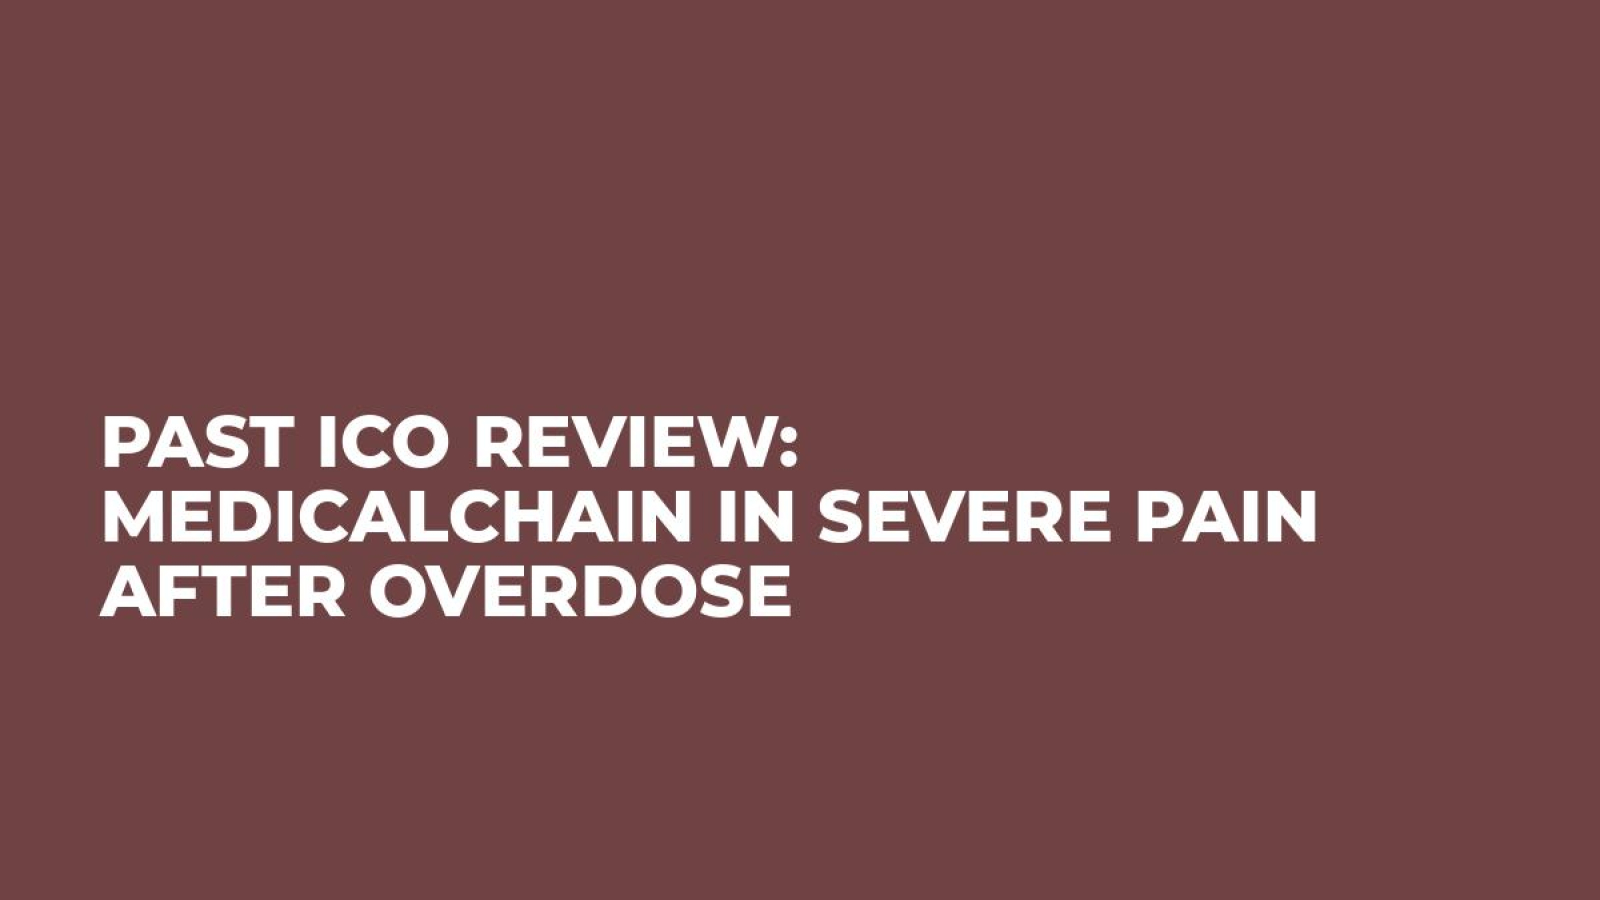 Past ICO Review: MedicalChain in Severe Pain After Overdose